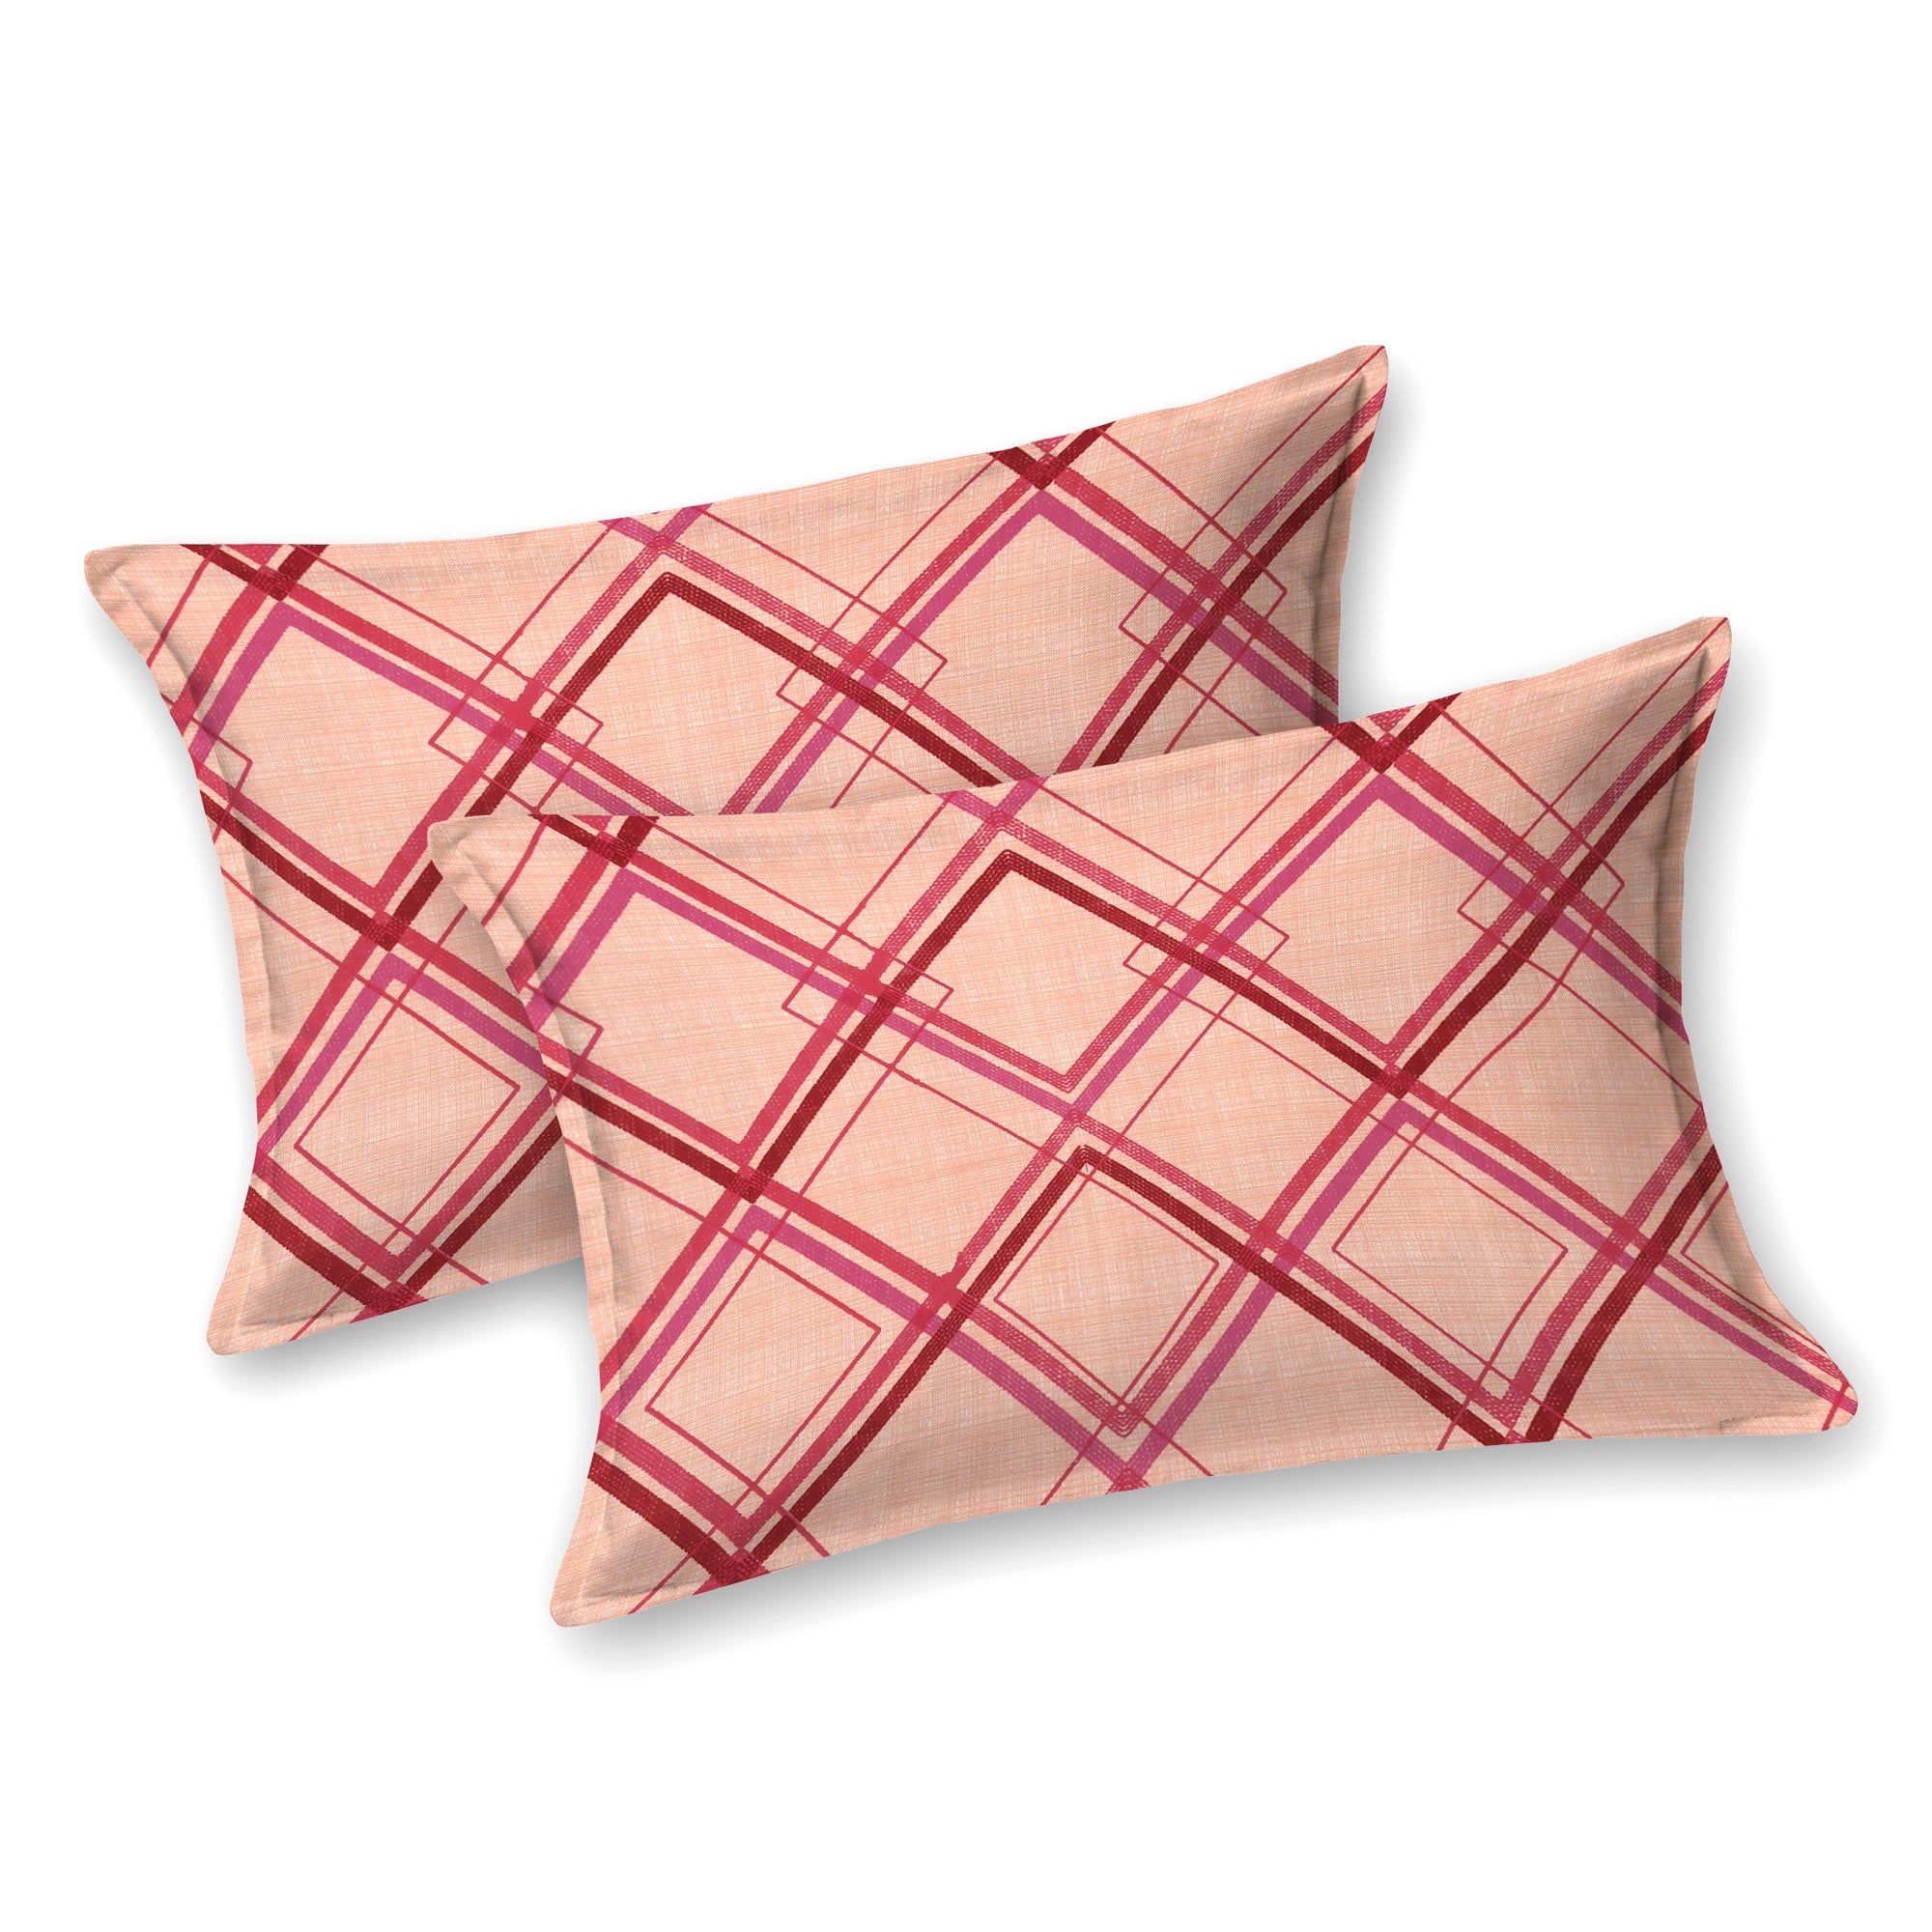 eCraftIndia 250 TC Red Geometric Square Printed Cotton Double Bedsheet With 2 Pillow Covers 3